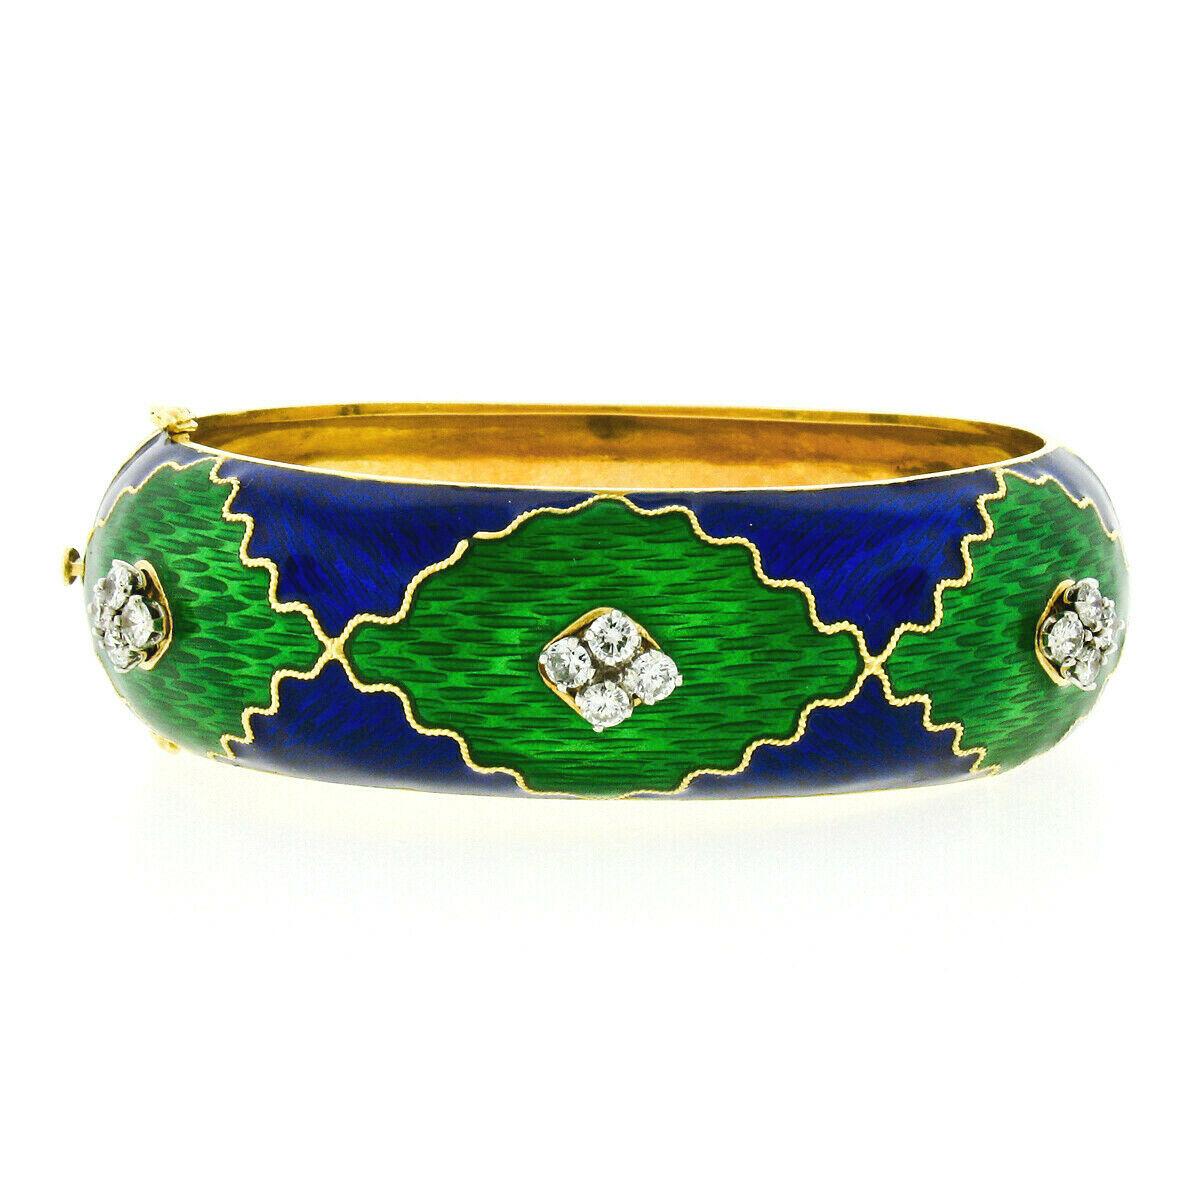 This breathtaking vintage bracelet was designed and crafted in Italy from solid 18k yellow gold. It features a bold and unique style consisting of uniquely patterned sections that are separated by a twisted gold wire into numerous cells, and covered